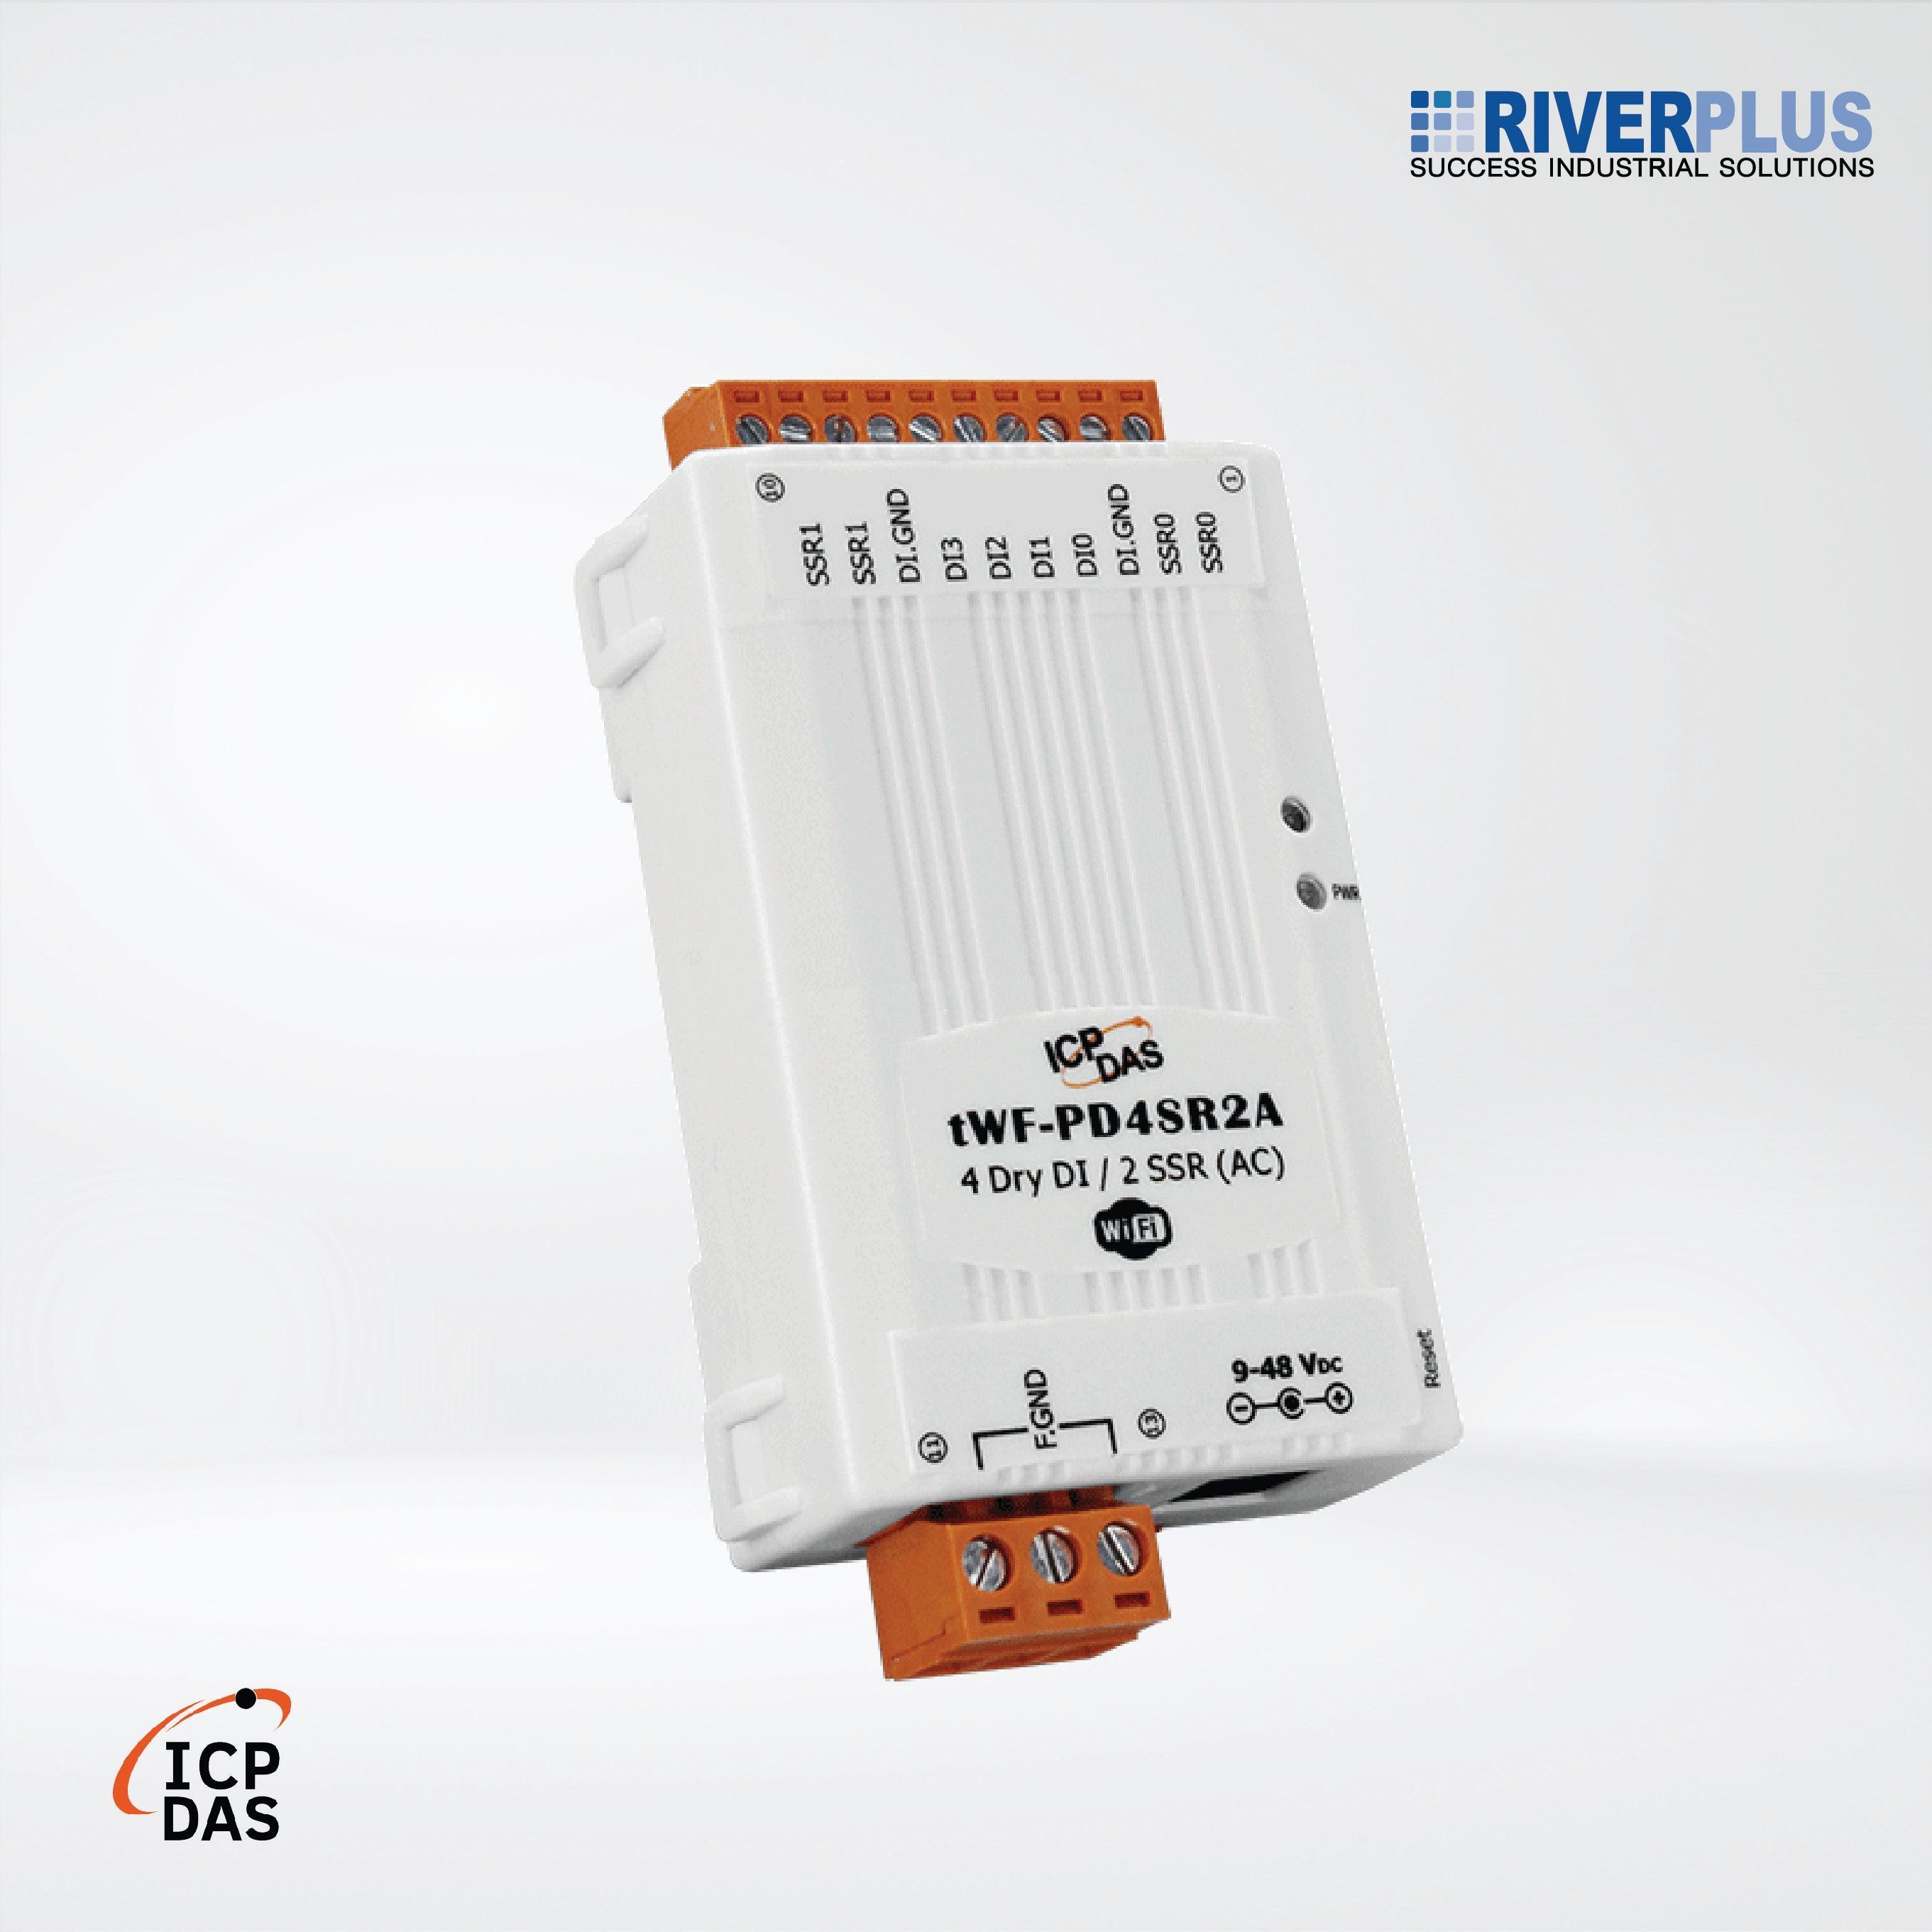 tWF-PD4SR2A Tiny Wi-Fi I/O Module with Isolated 4-ch (Dry) DI and 2-ch AC SSR (Asia Only) - Riverplus